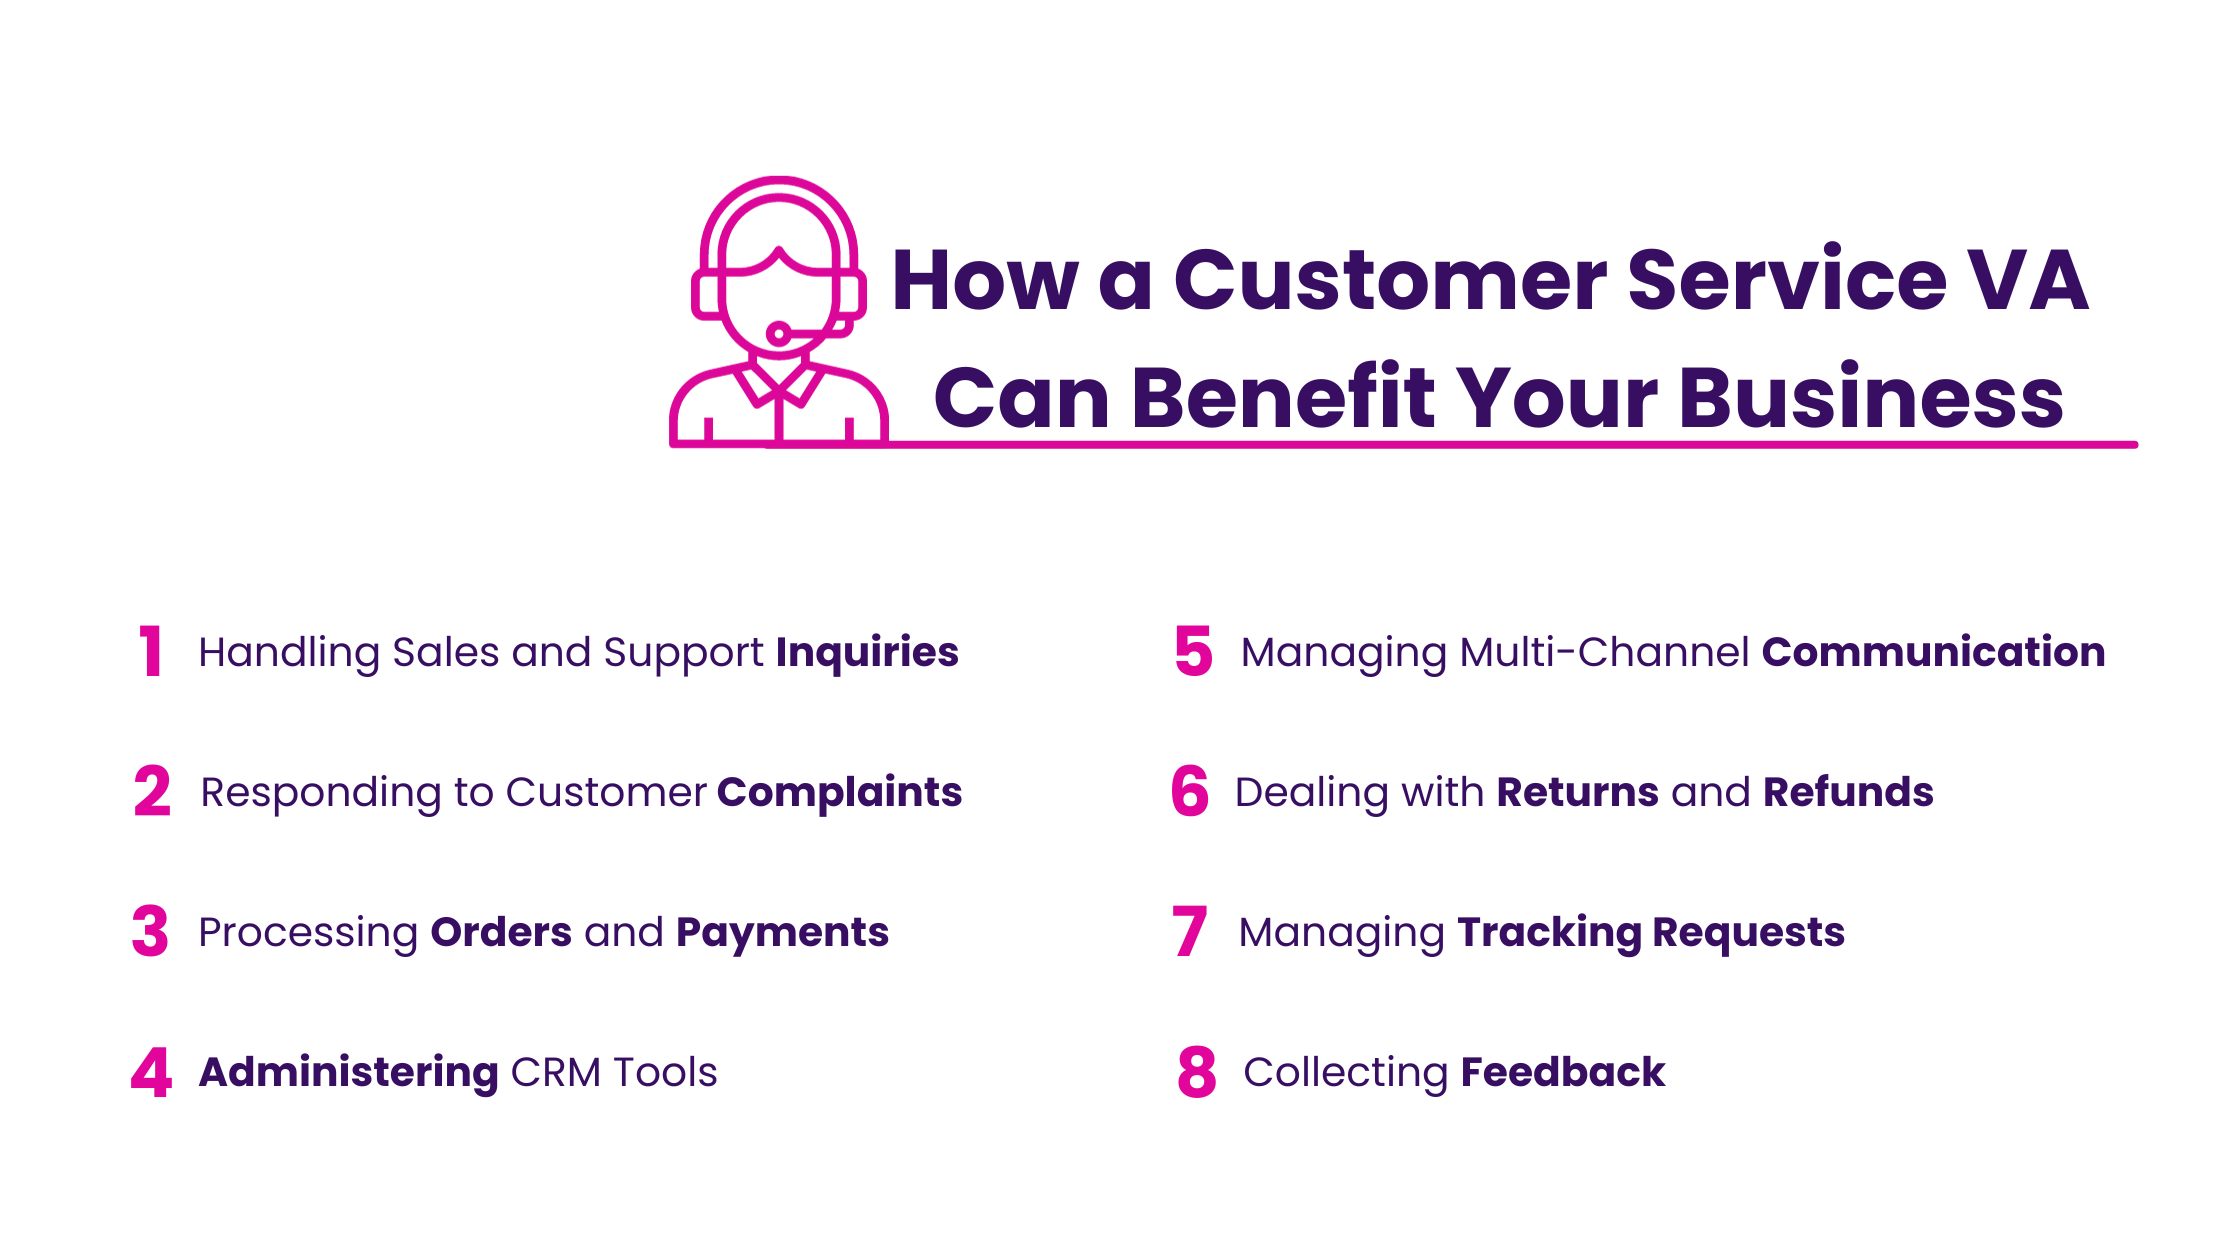 How a Customer Service Virtual Assistant Can Benefit Your Business